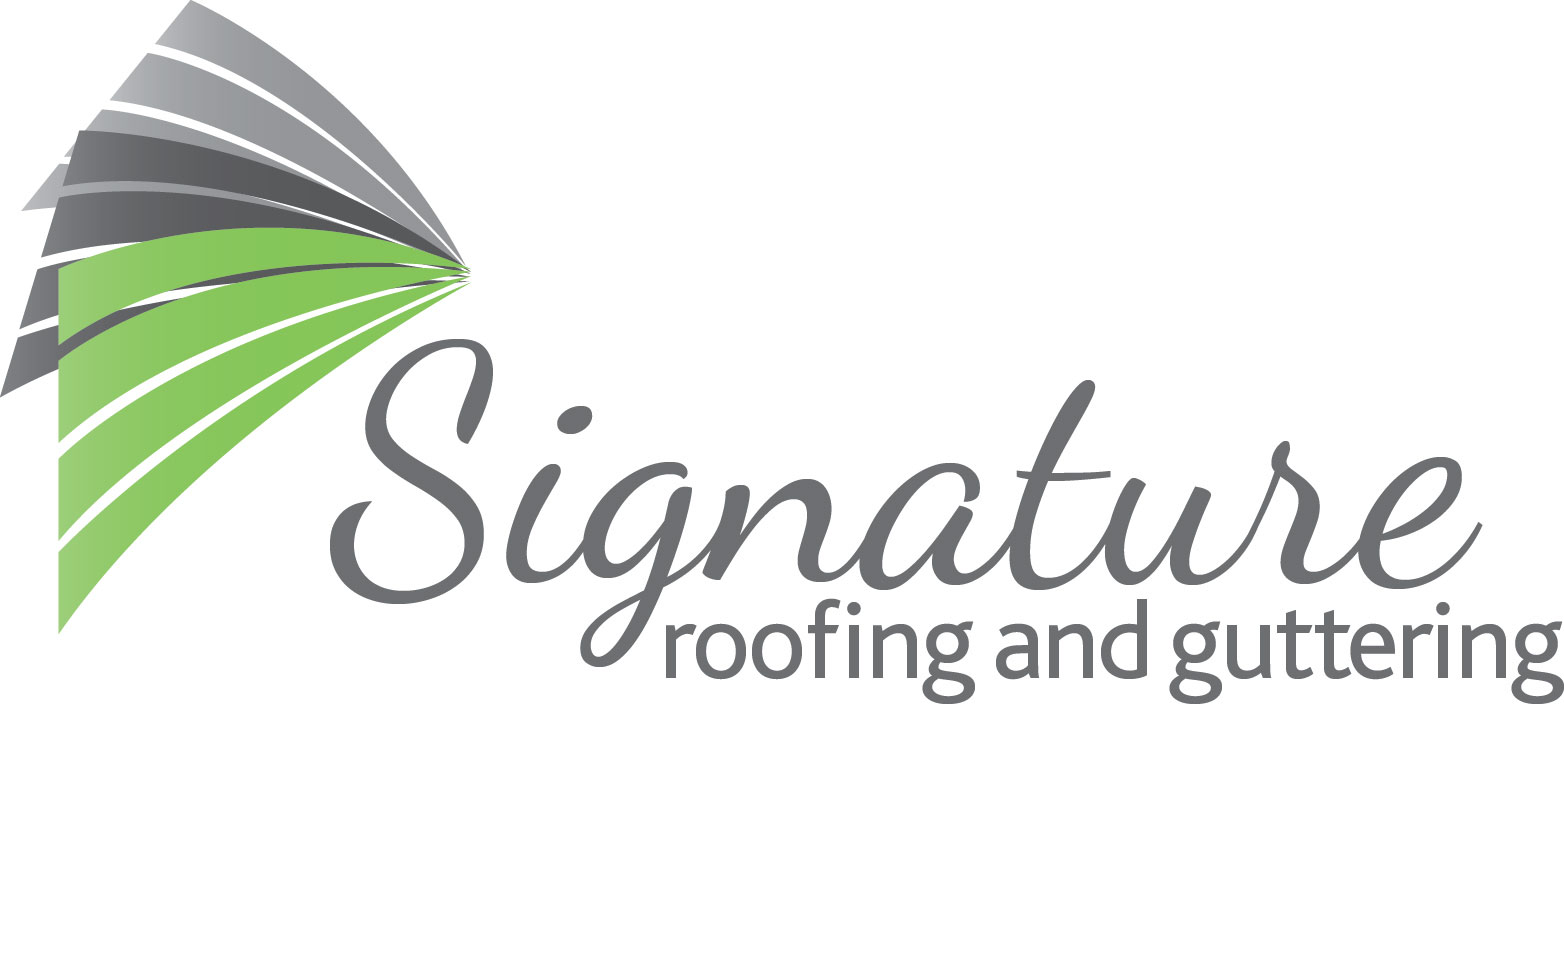 Signature Roofing and Guttering - Roofers Brisbane and Sunshine Coast